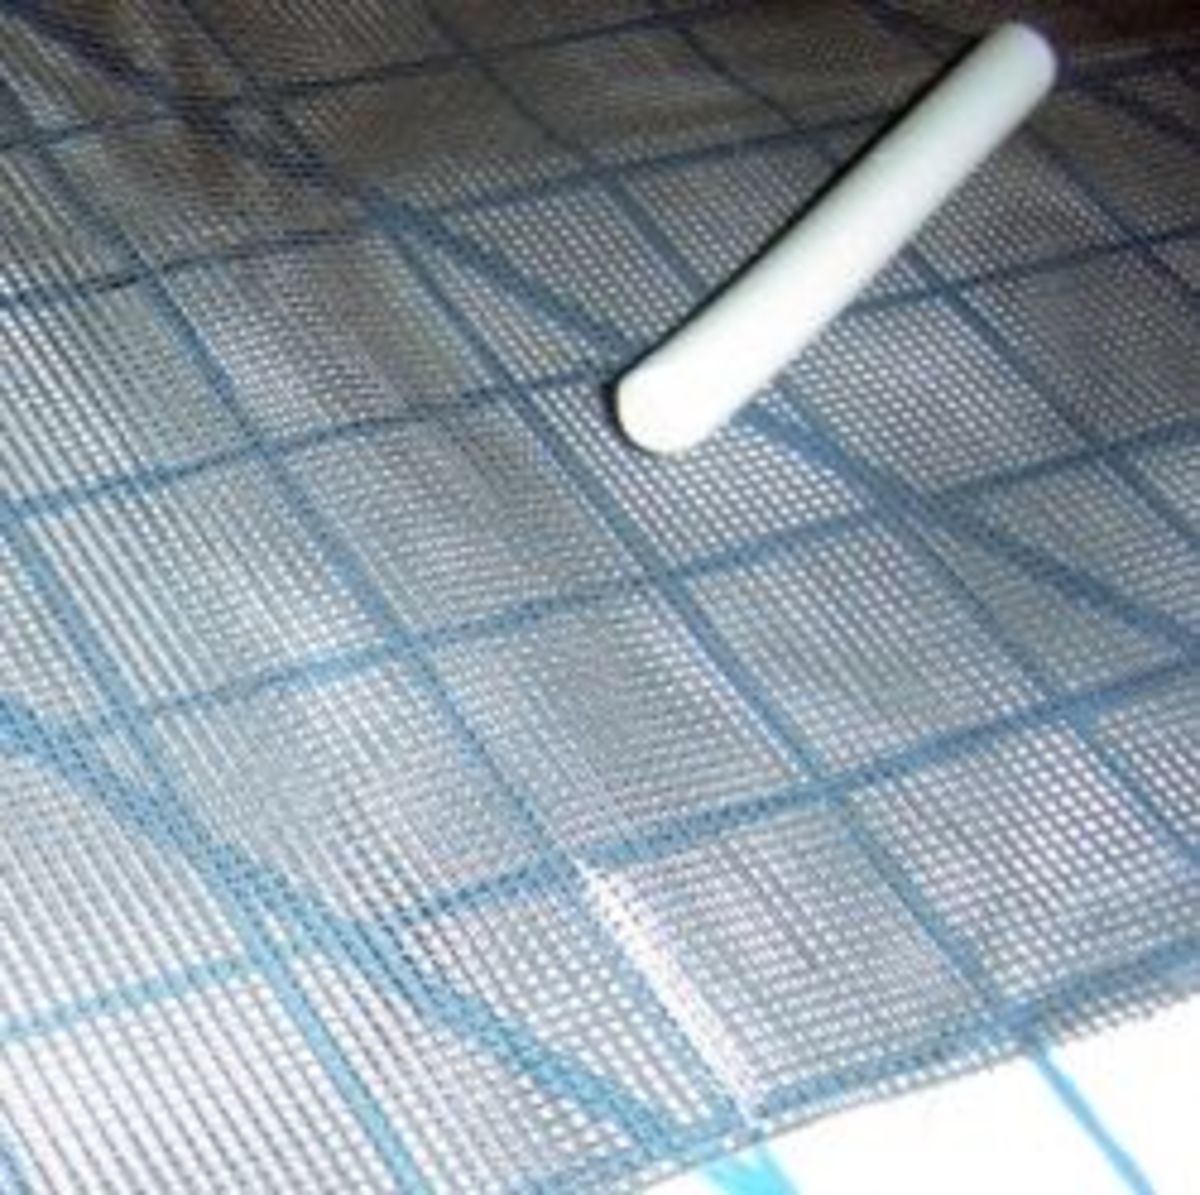 Marking Window Screen for Sewing